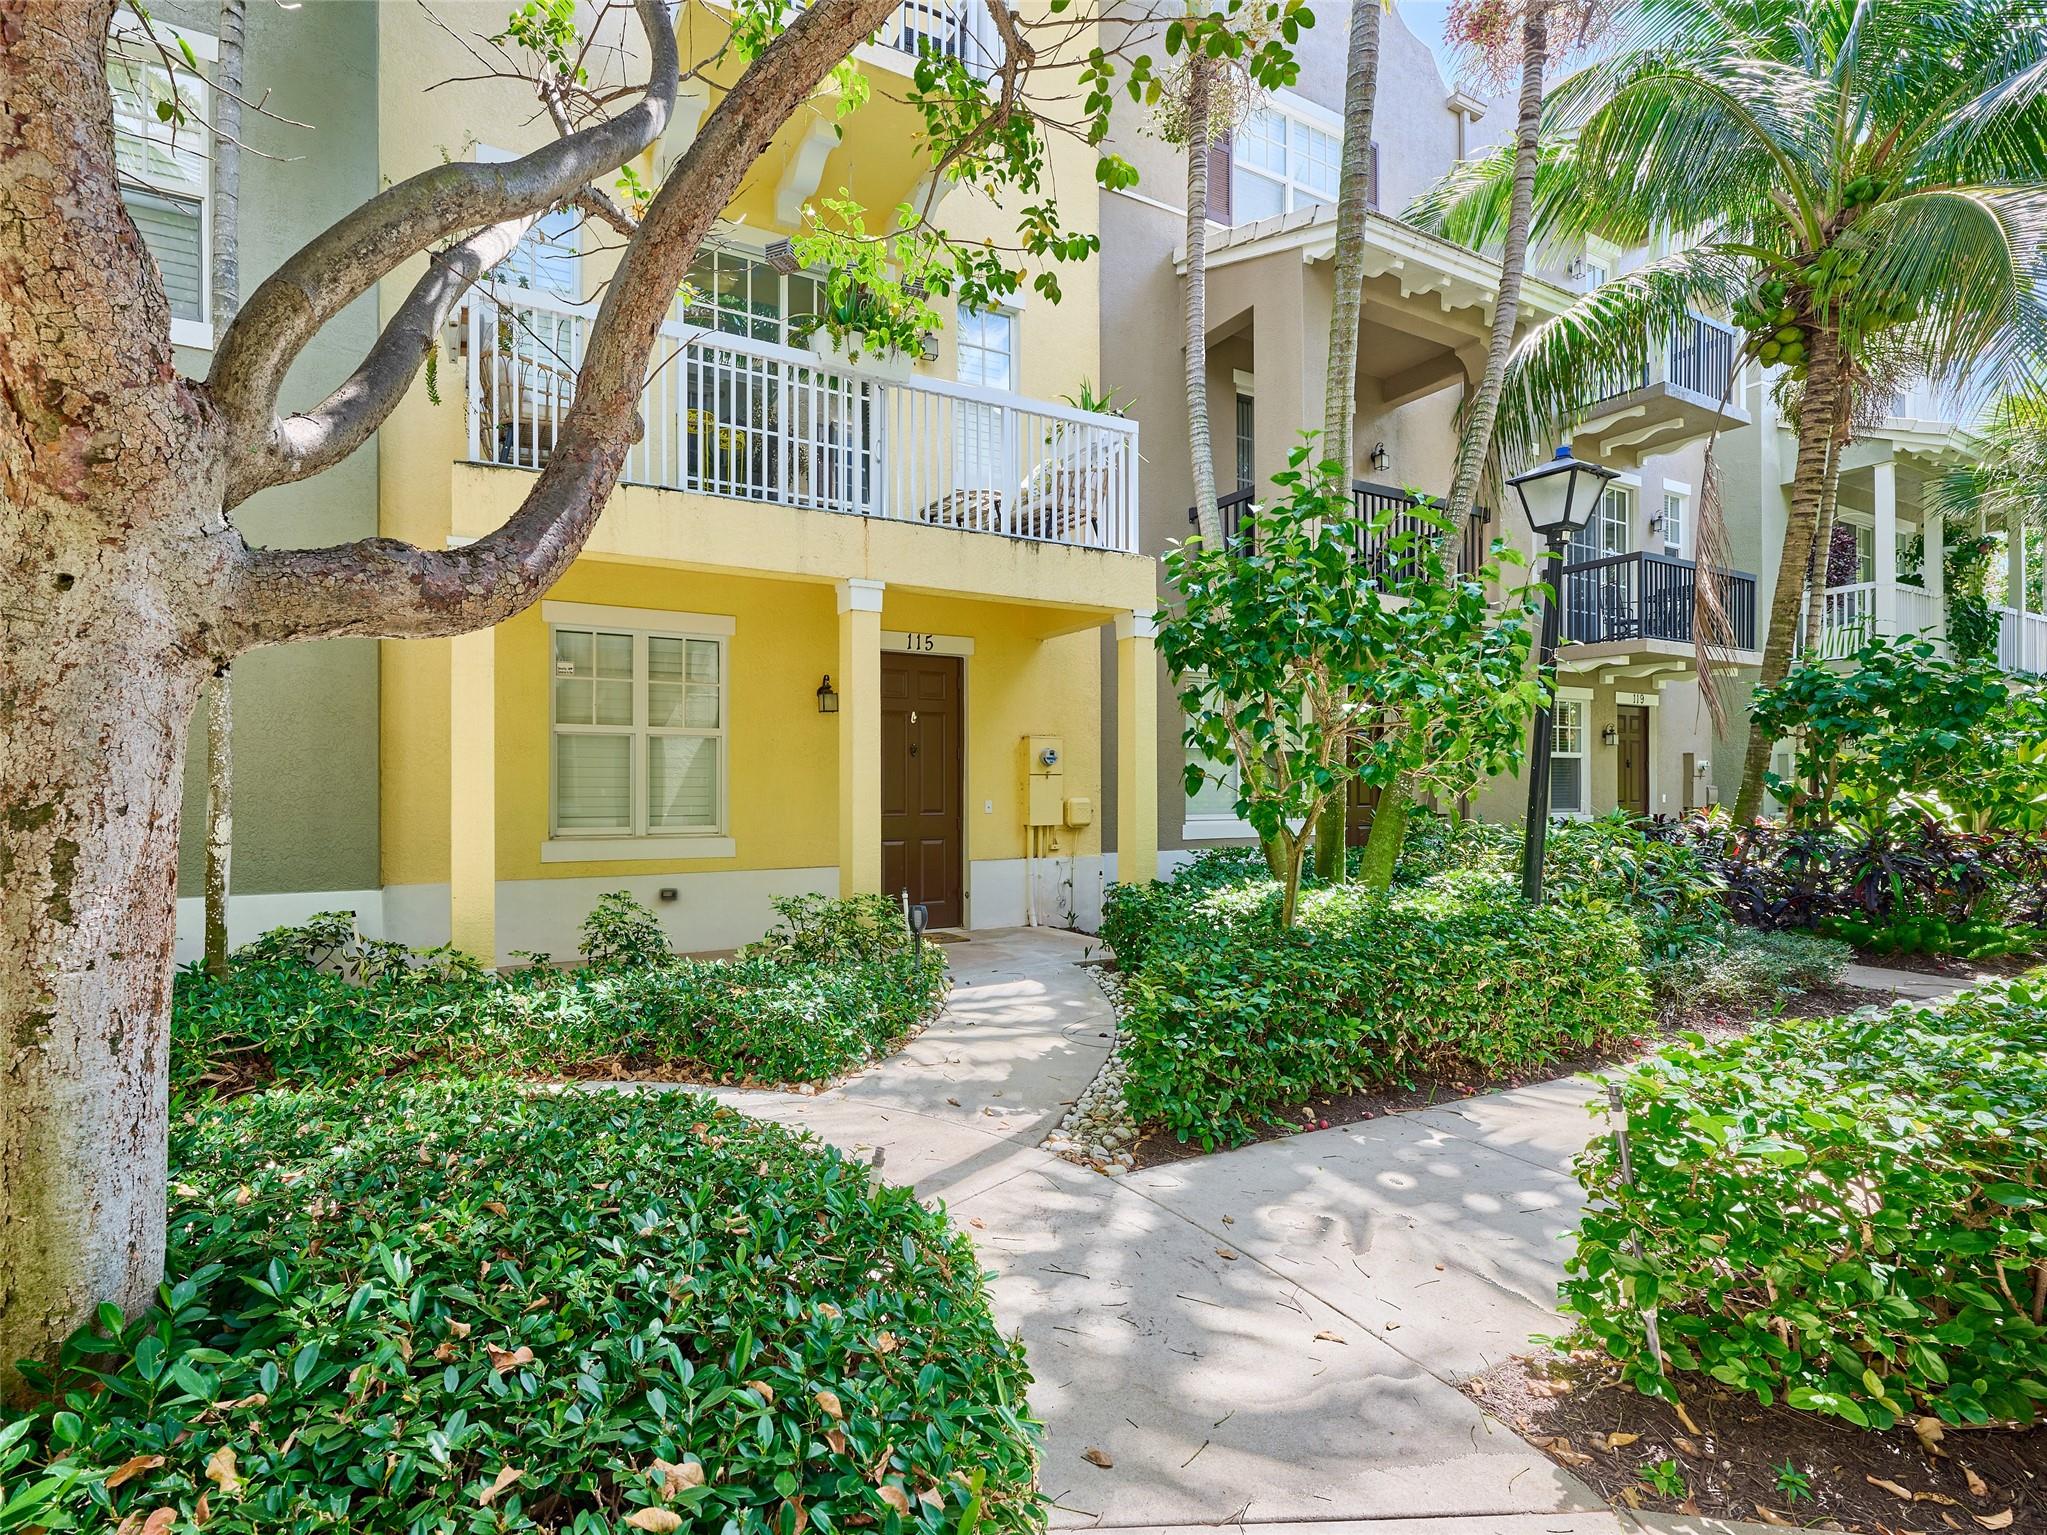 View Delray Beach, FL 33444 townhome